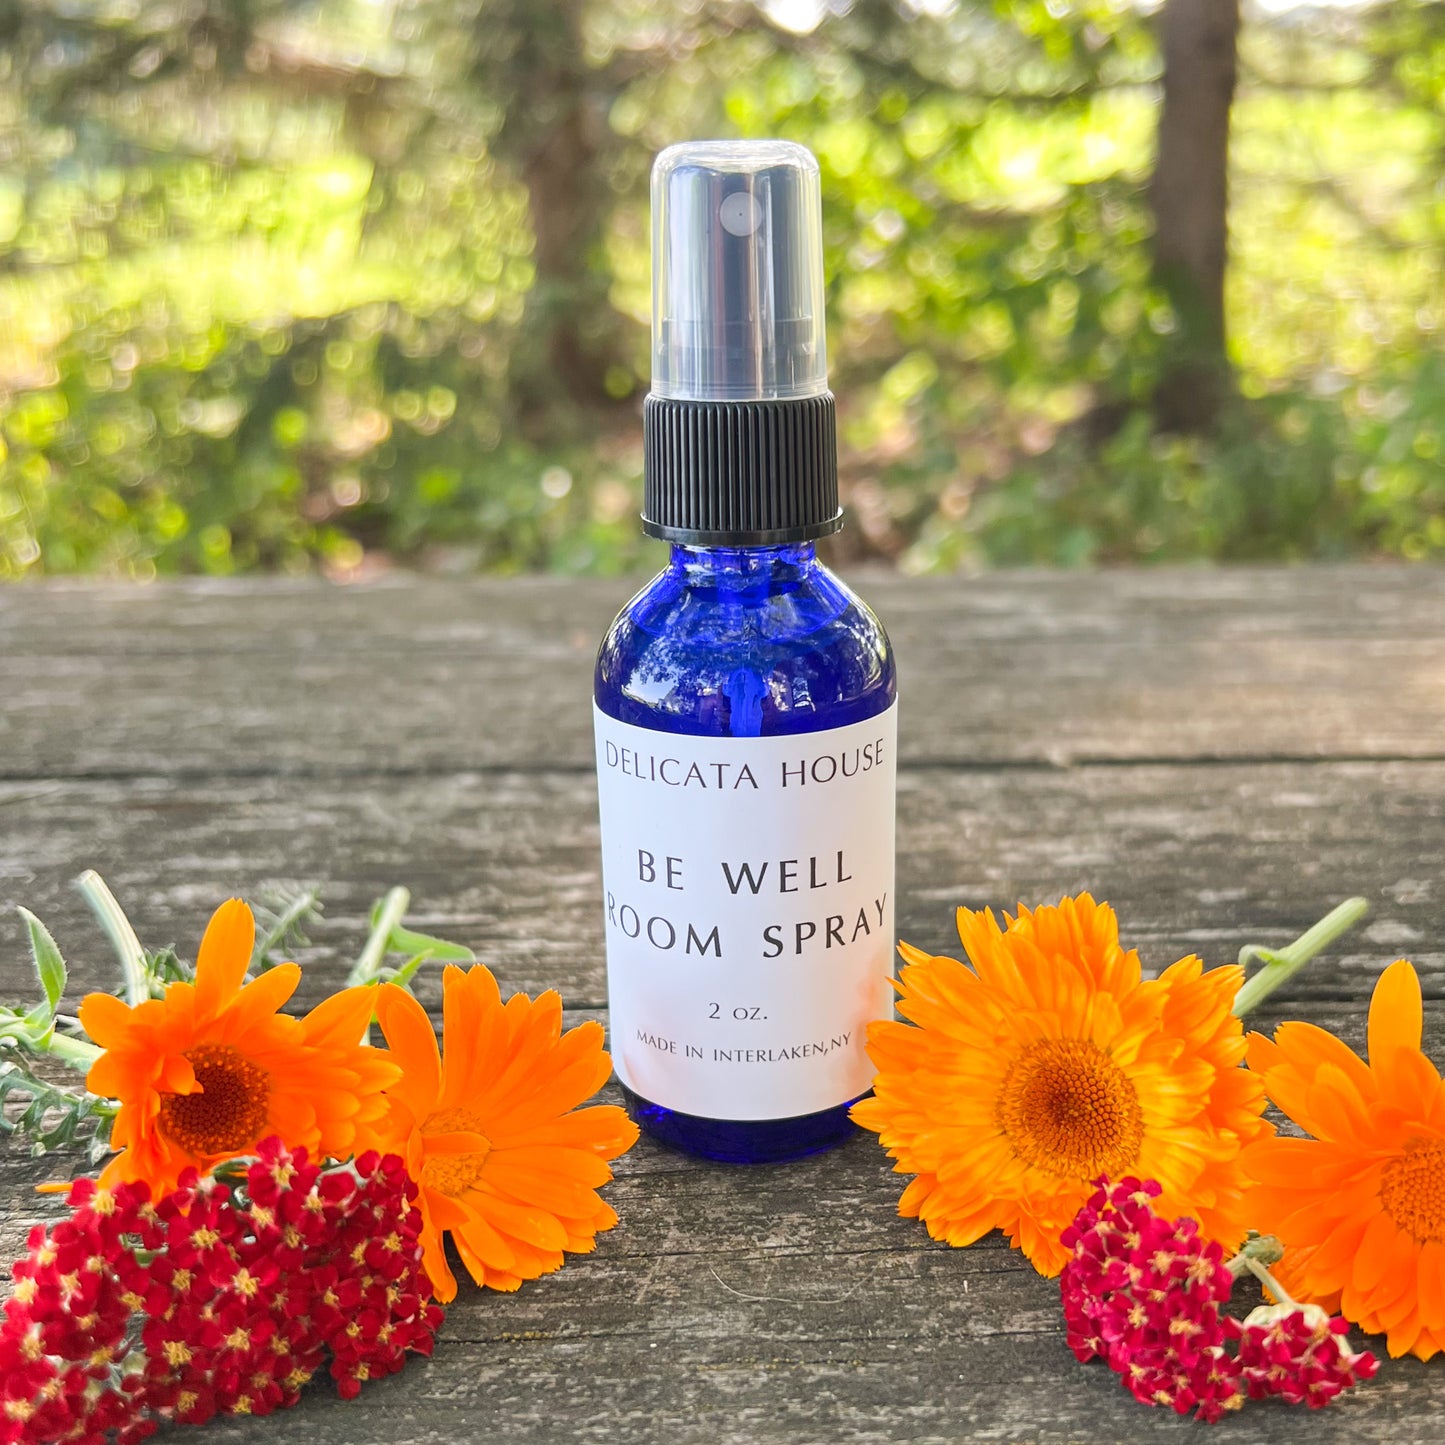 Be Well Room Spray - Clean and Clear Room Spray - Bright and Uplifting Room Spray with Grapefruit, Basil, and Tea Tree essential oils